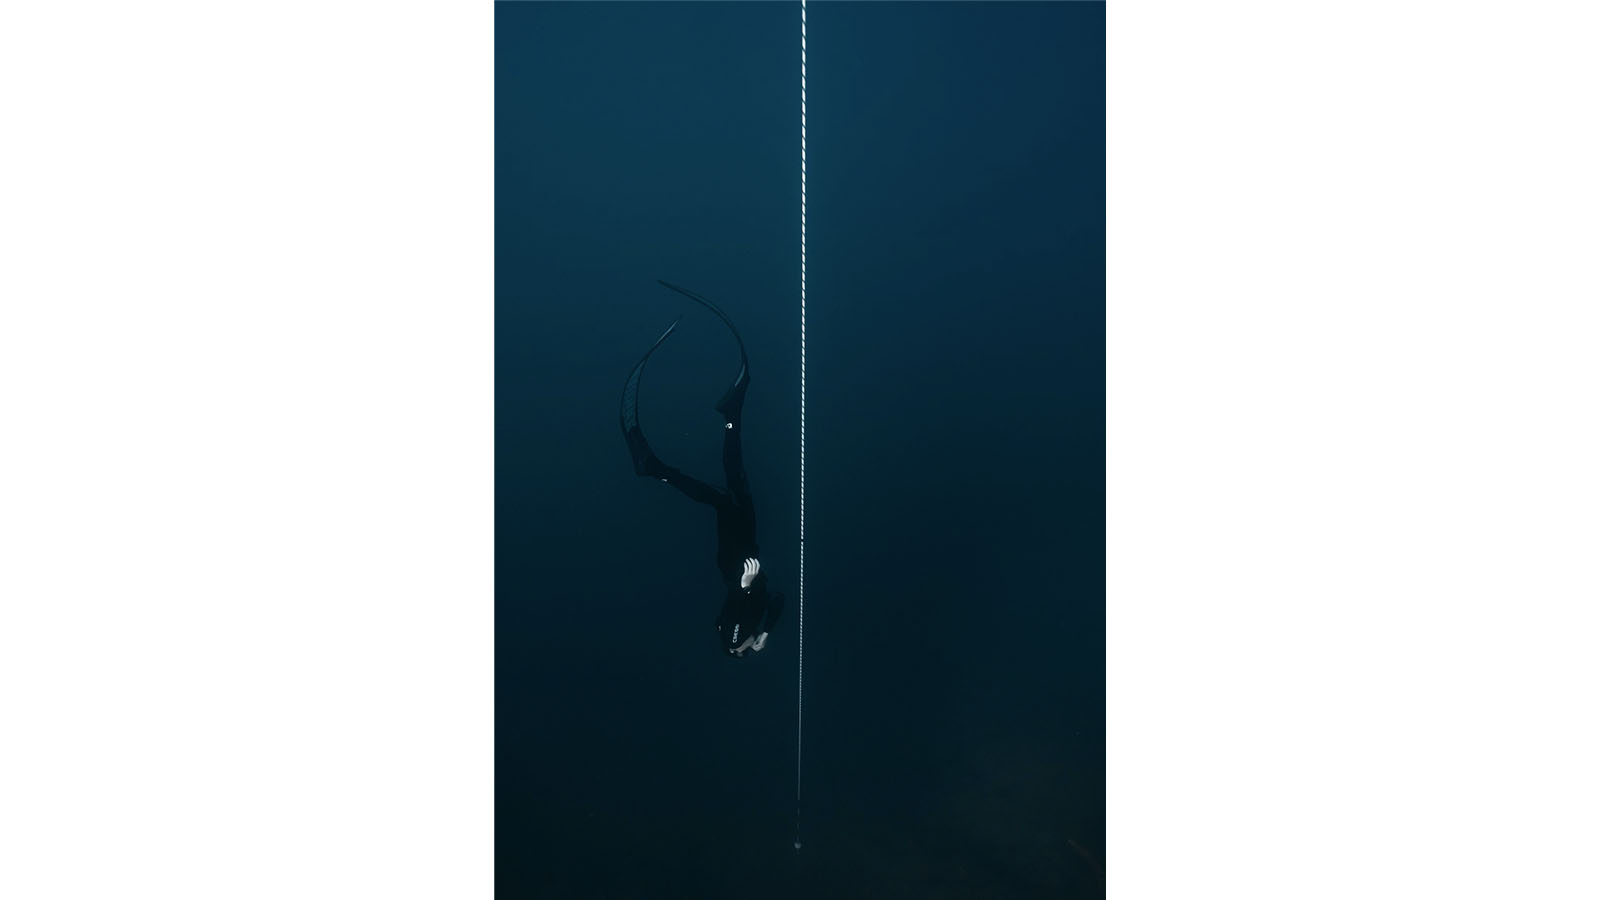 A man is free diving downwards in the ocean, parallel to a safety line